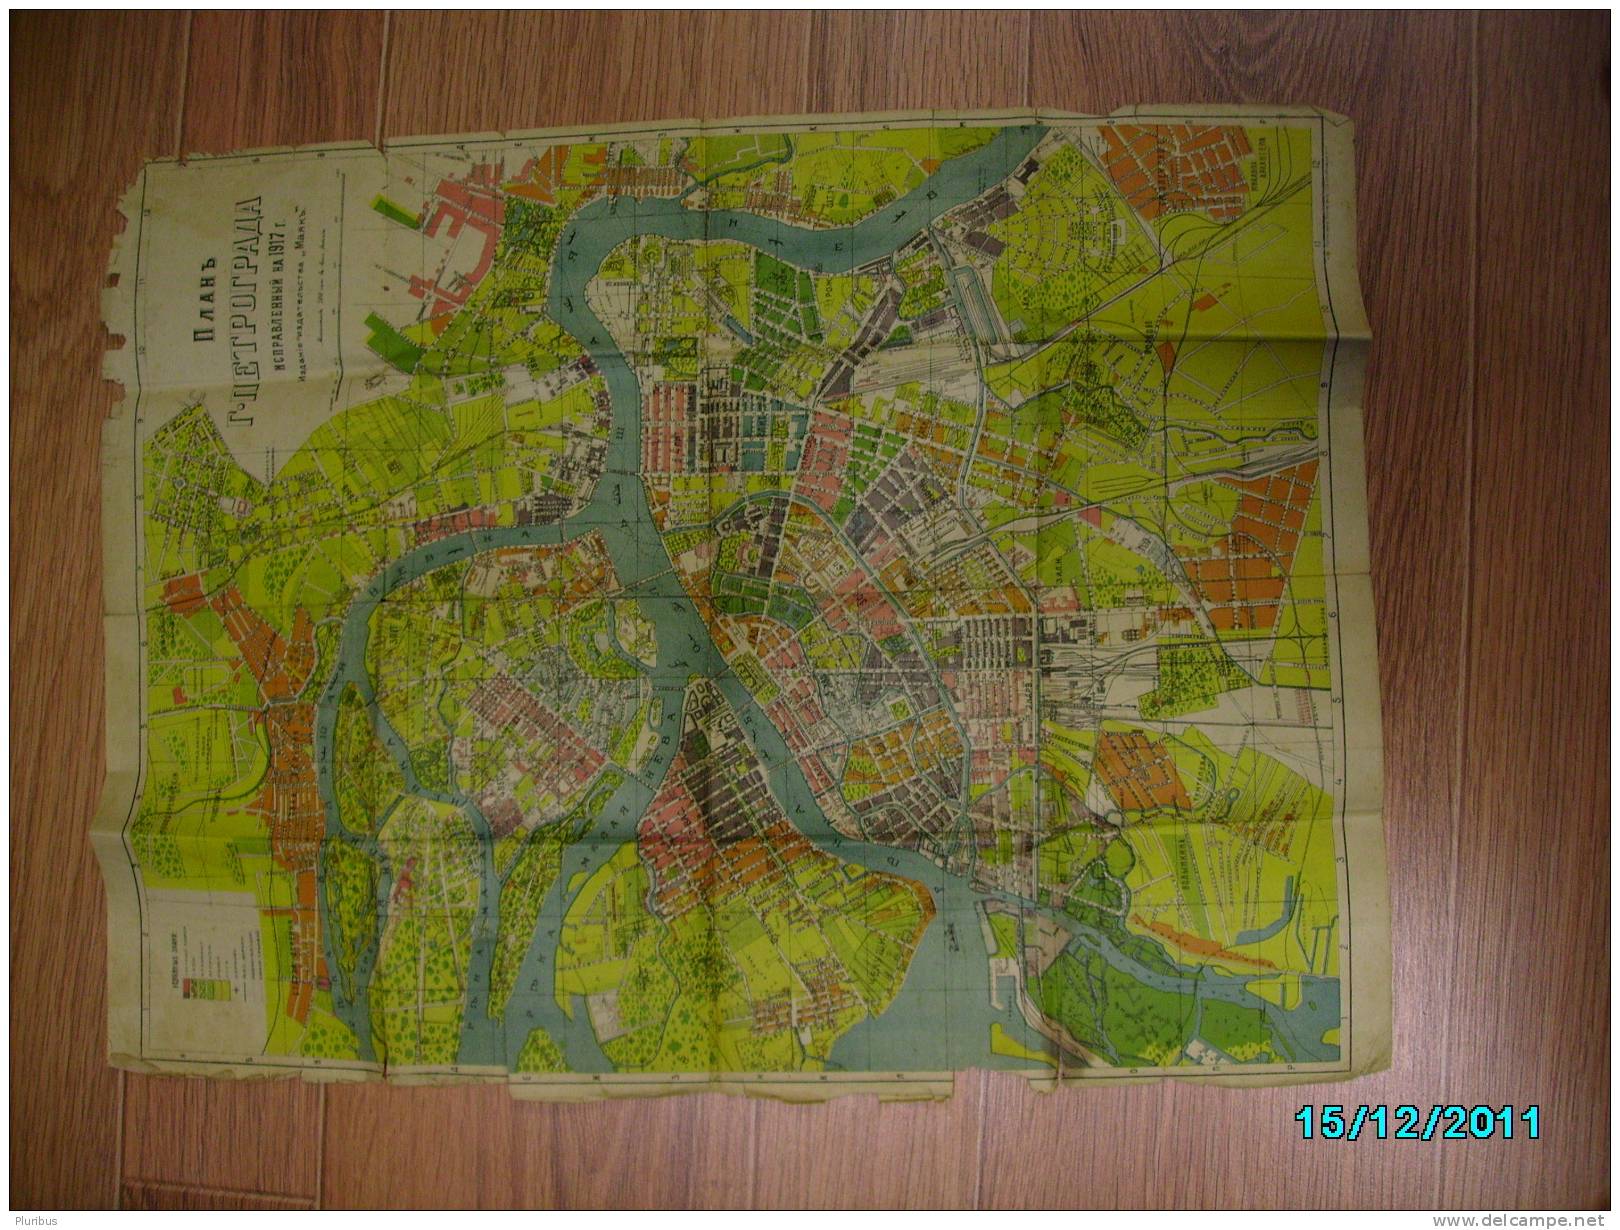 1917 RUSSIA MAP OF ST. PETERSBURG, PETERBURG, PETROGRAD, - Geographical Maps